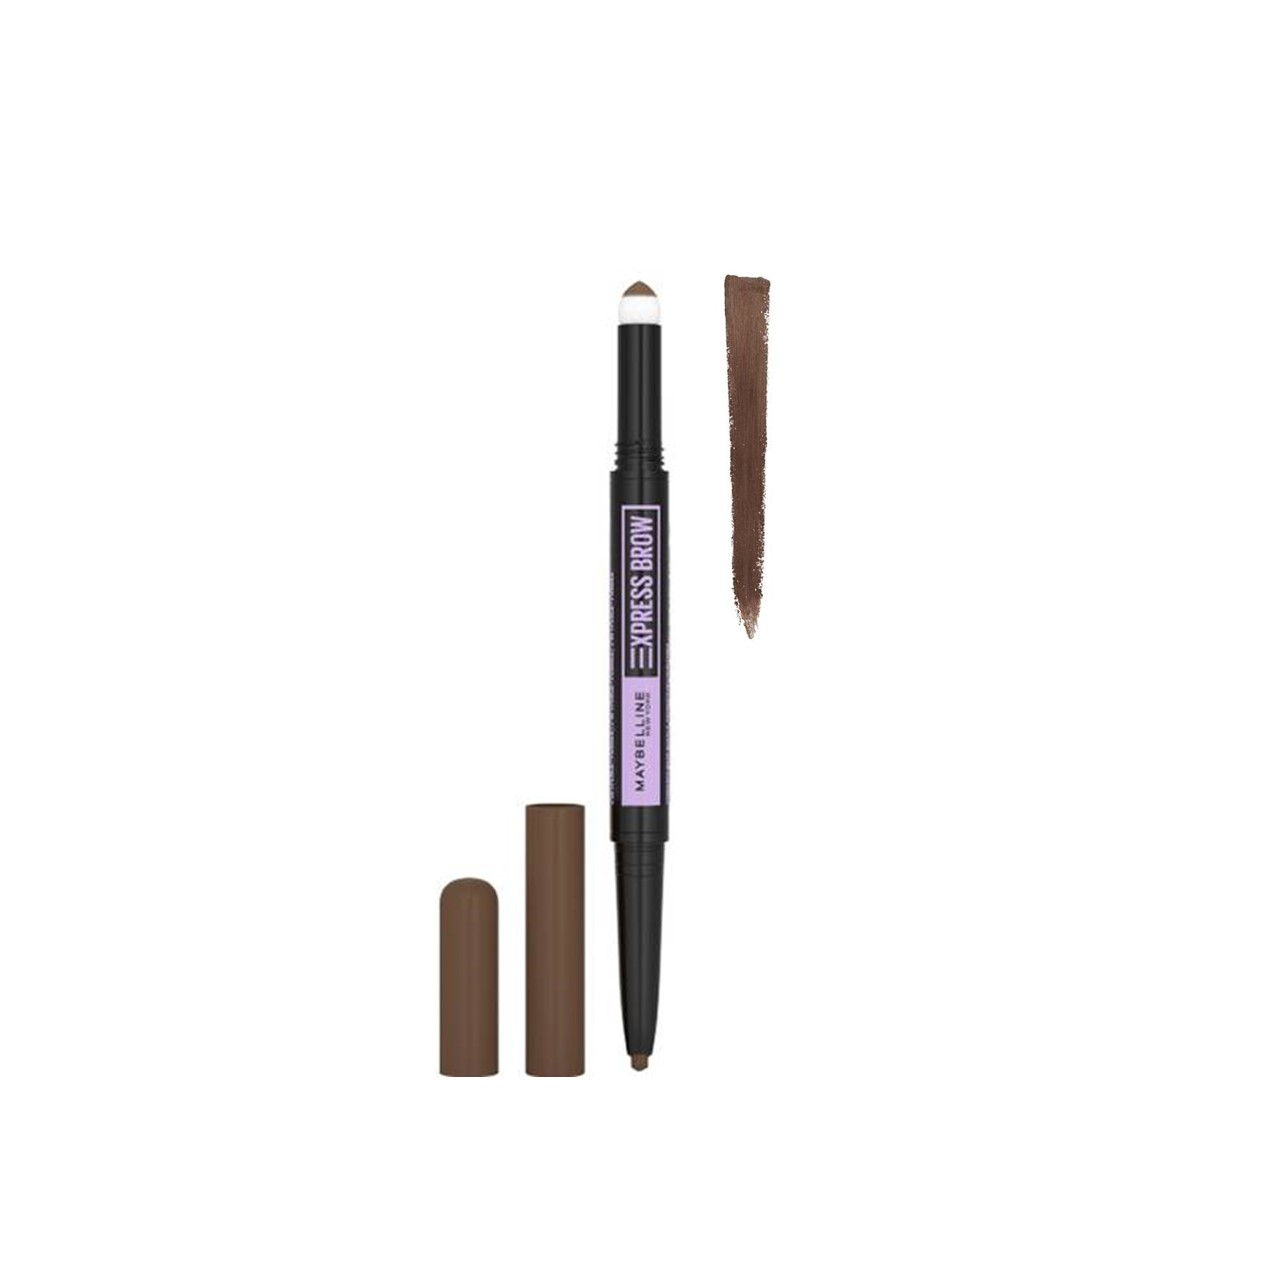 Buy Maybelline Express Brow Powder Pencil USA 2-in-1 Satin + · Duo